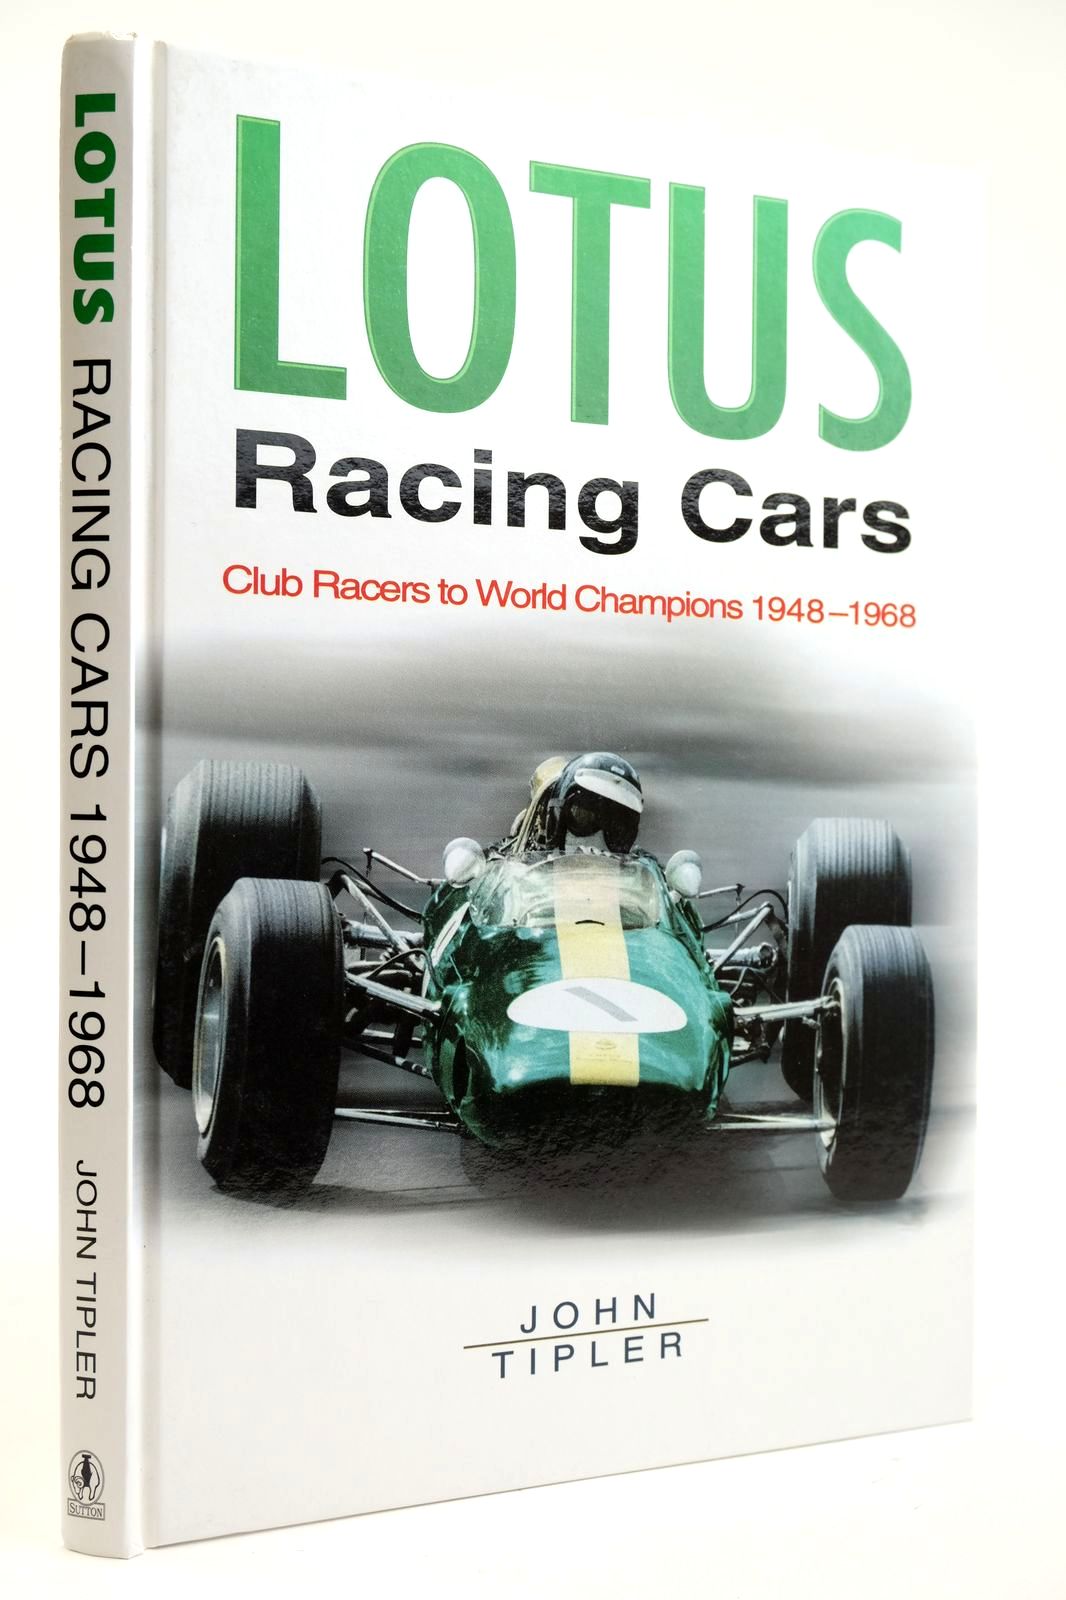 Photo of LOTUS RACING CARS: CLUB RACERS TO WORLD CHAMPIONS 1948-1968 written by Tipler, John published by Sutton Publishing (STOCK CODE: 2132691)  for sale by Stella & Rose's Books